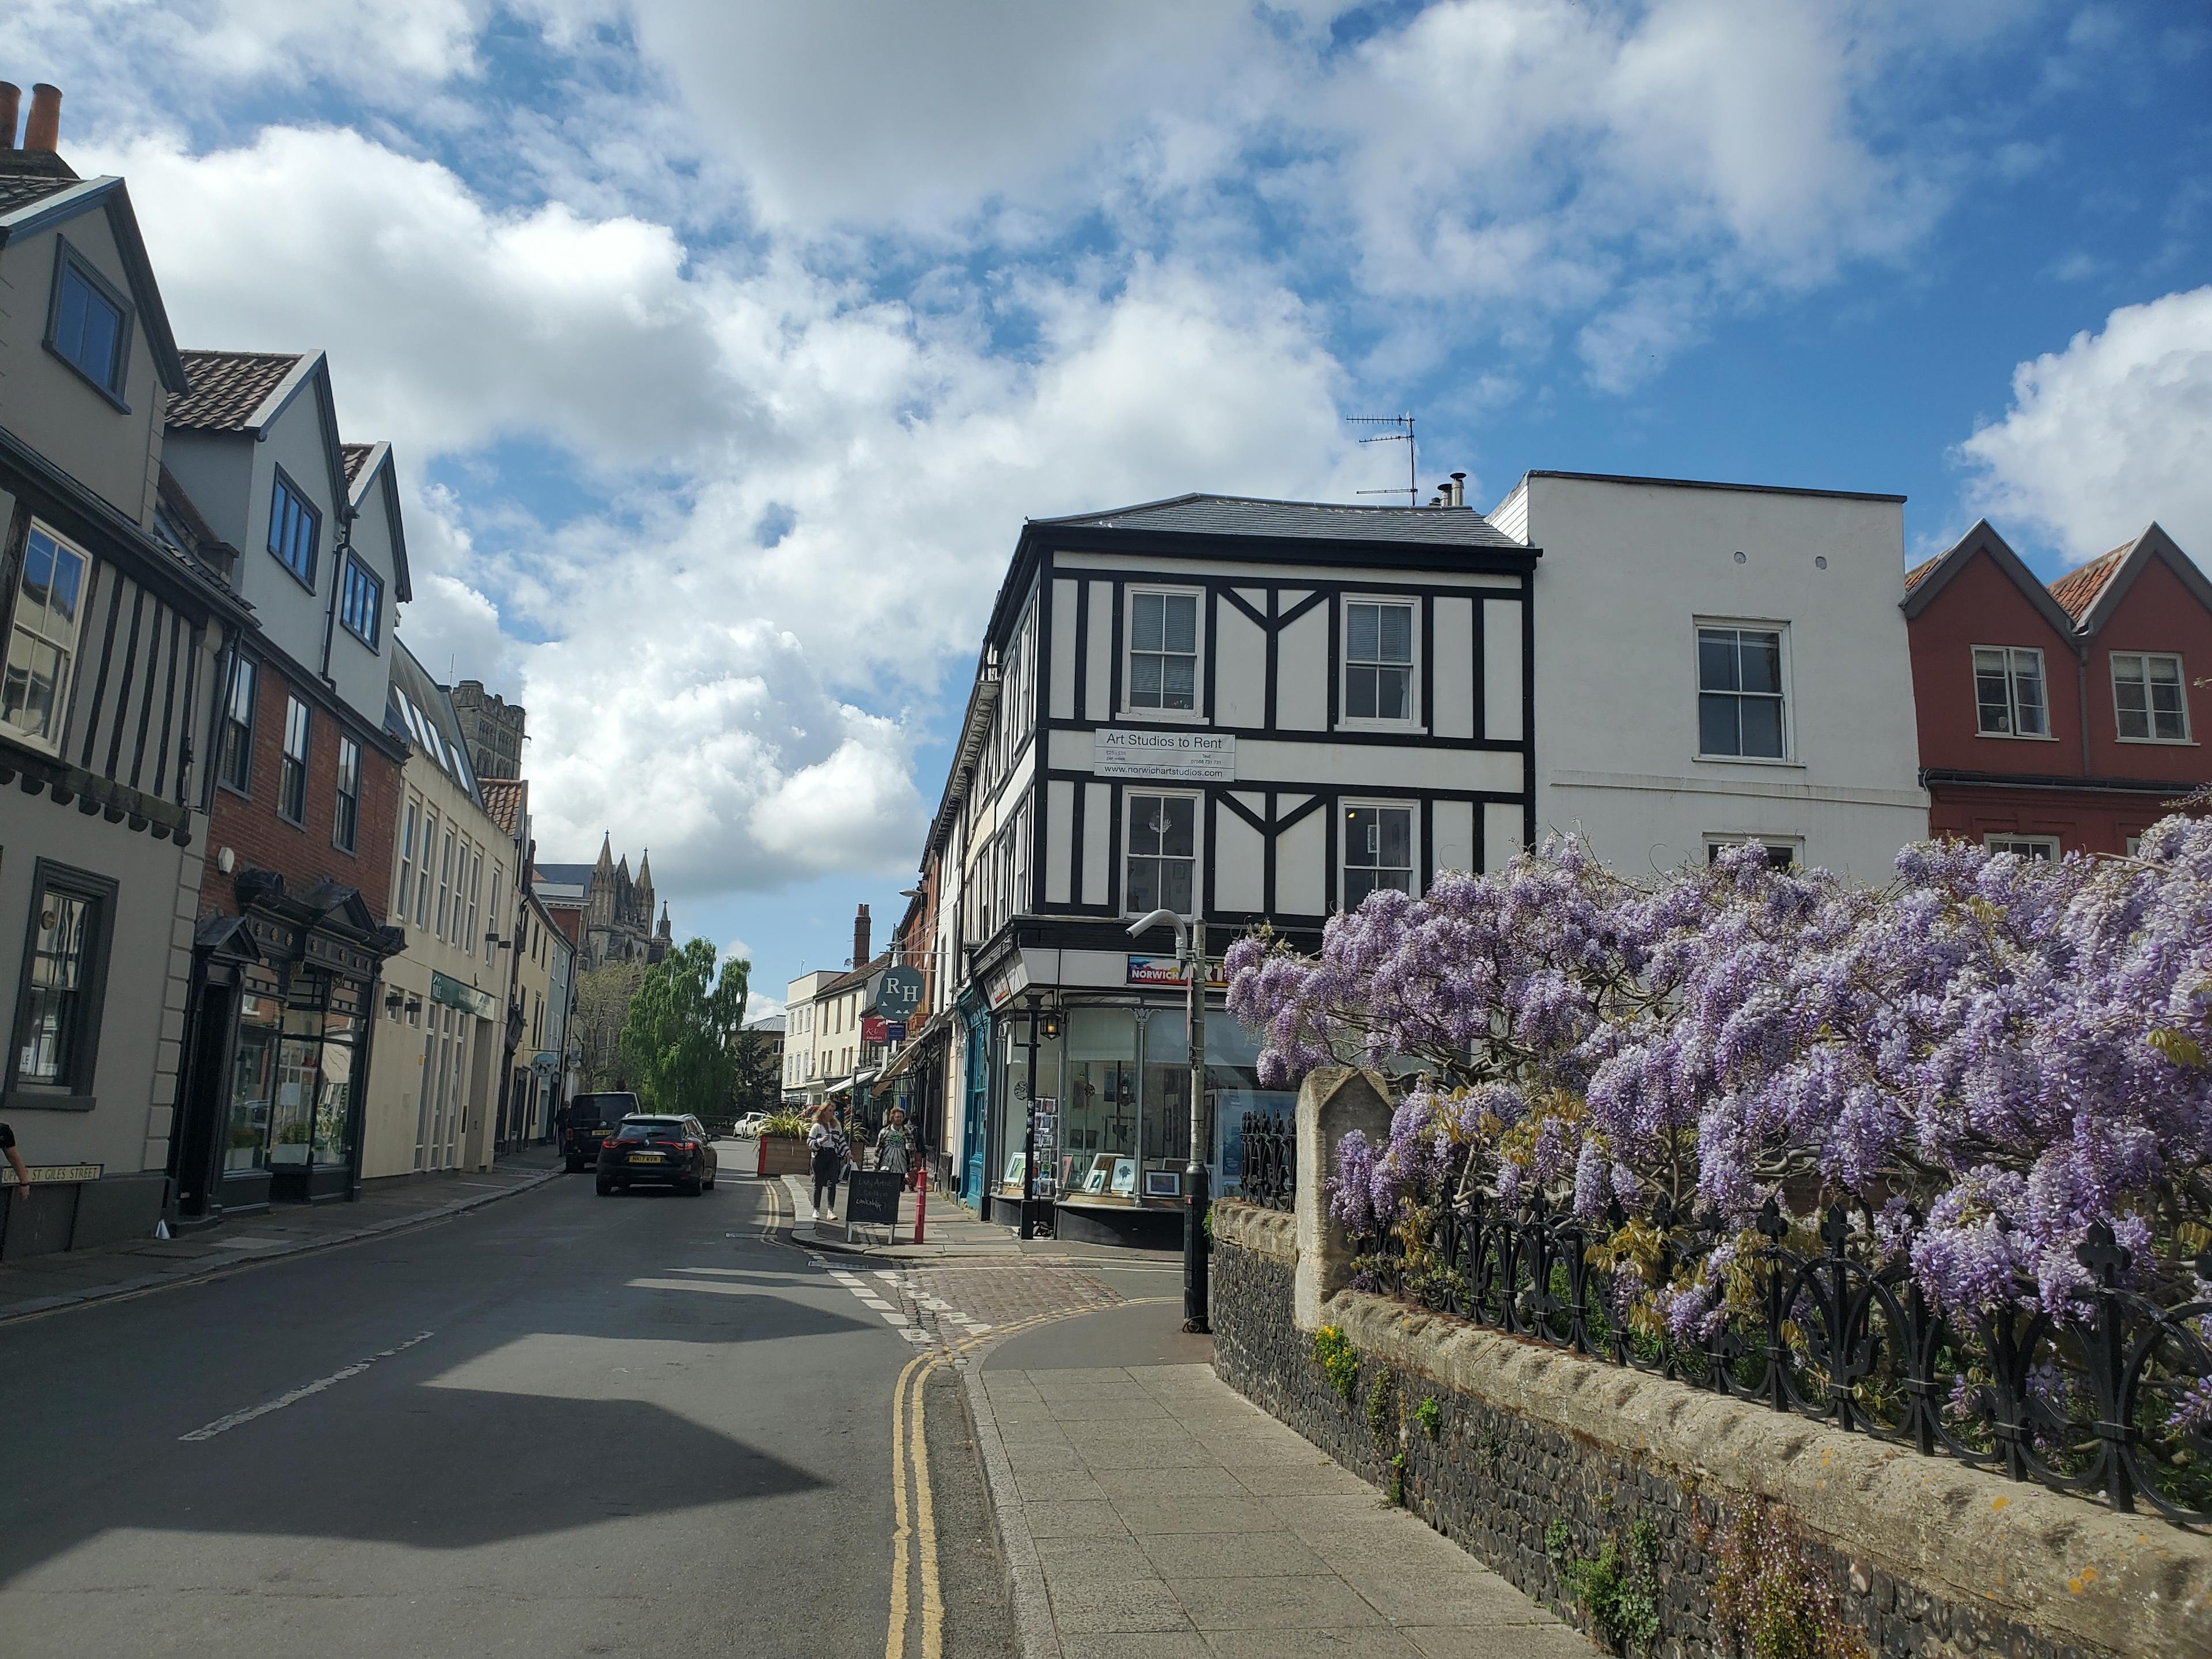 Photograph of Norwich in spring time.